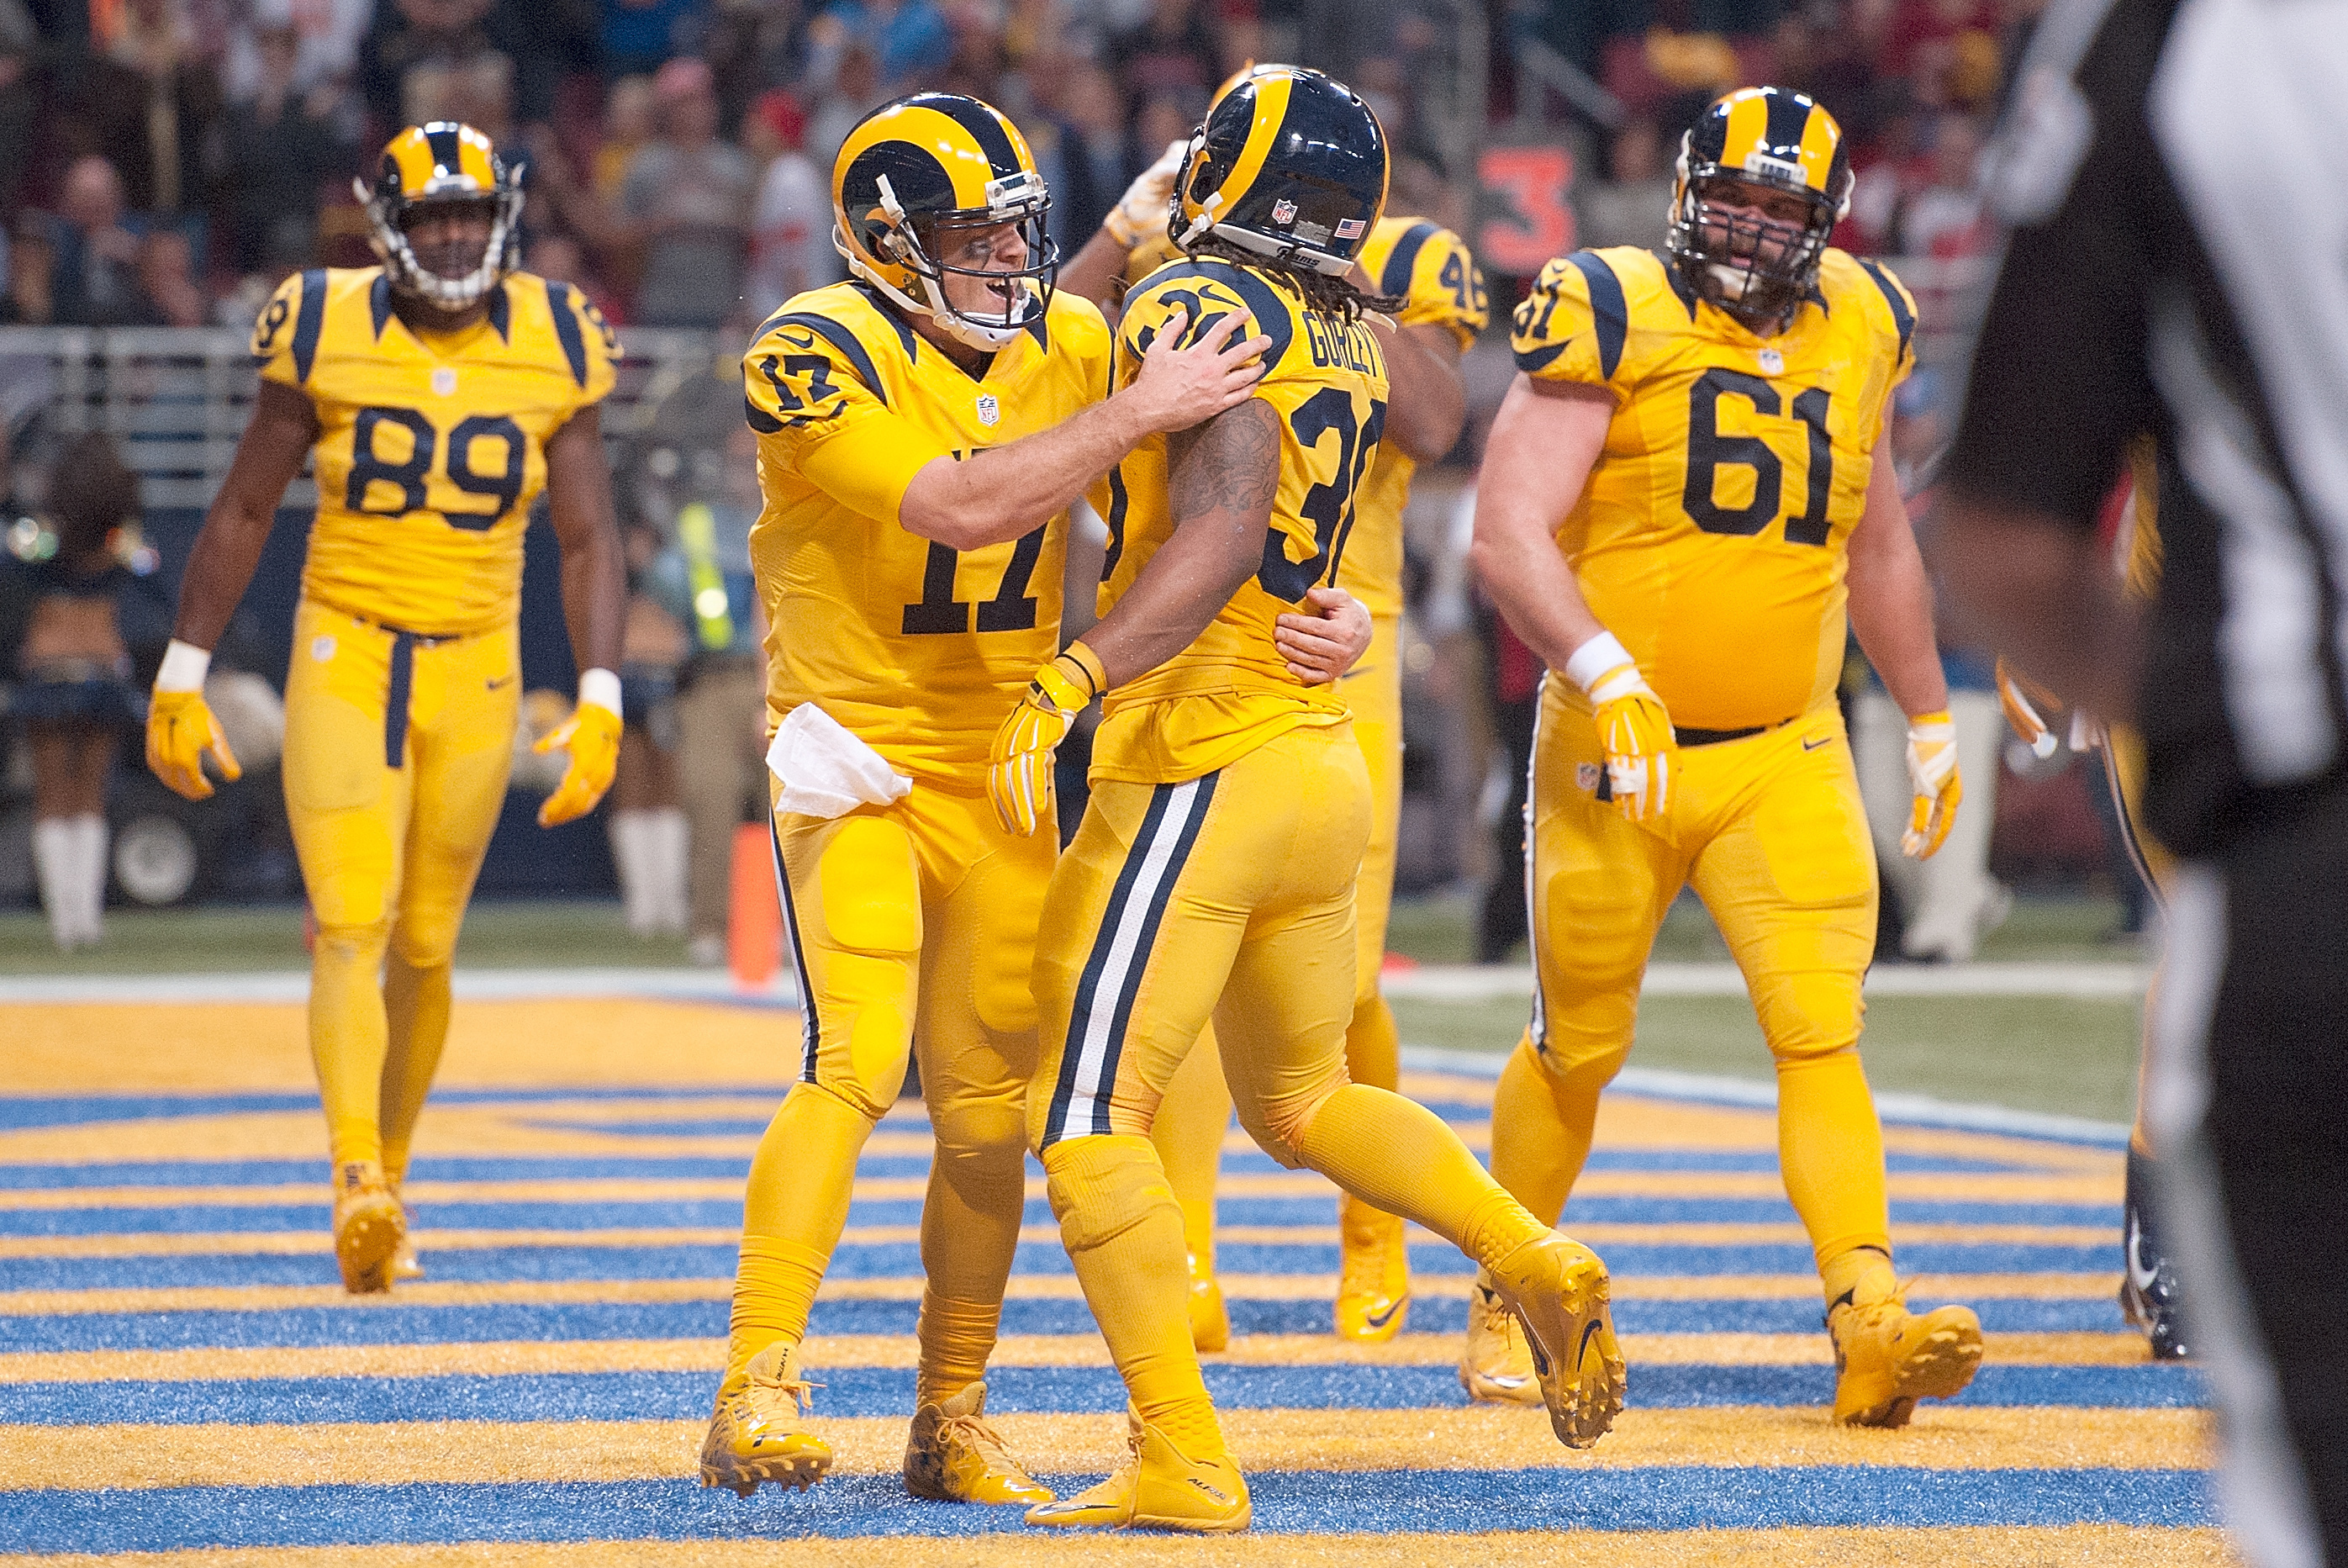 Packers' Color Rush Uniforms Appear to Be All Yellow